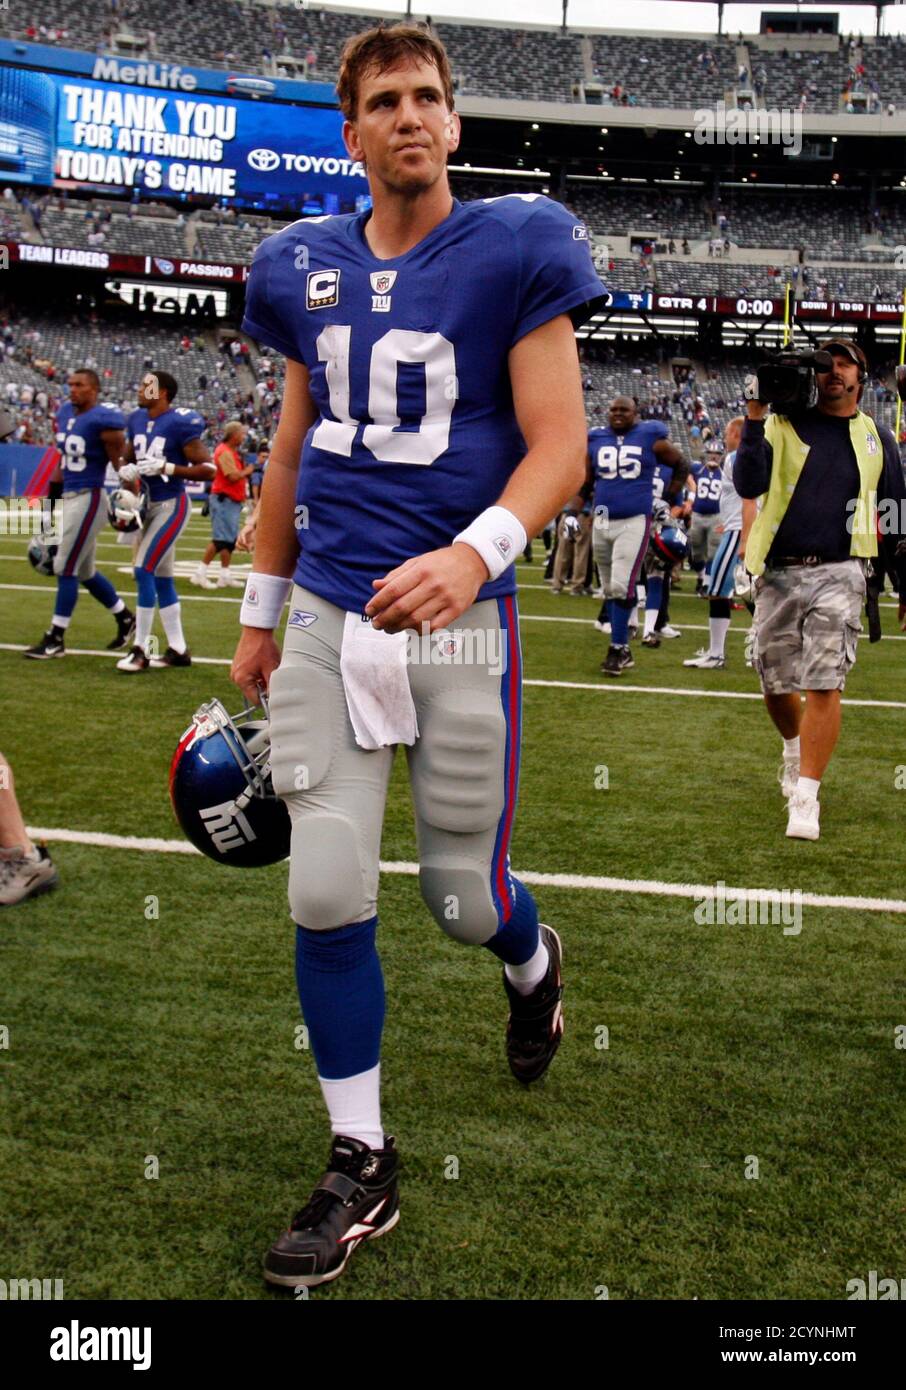 New York Giants quarterback Eli Manning leaves the field at the conclusion  of the fourth quarter of their NFL football game against the Tennessee  Titans in East Rutherford, New Jersey September 26,